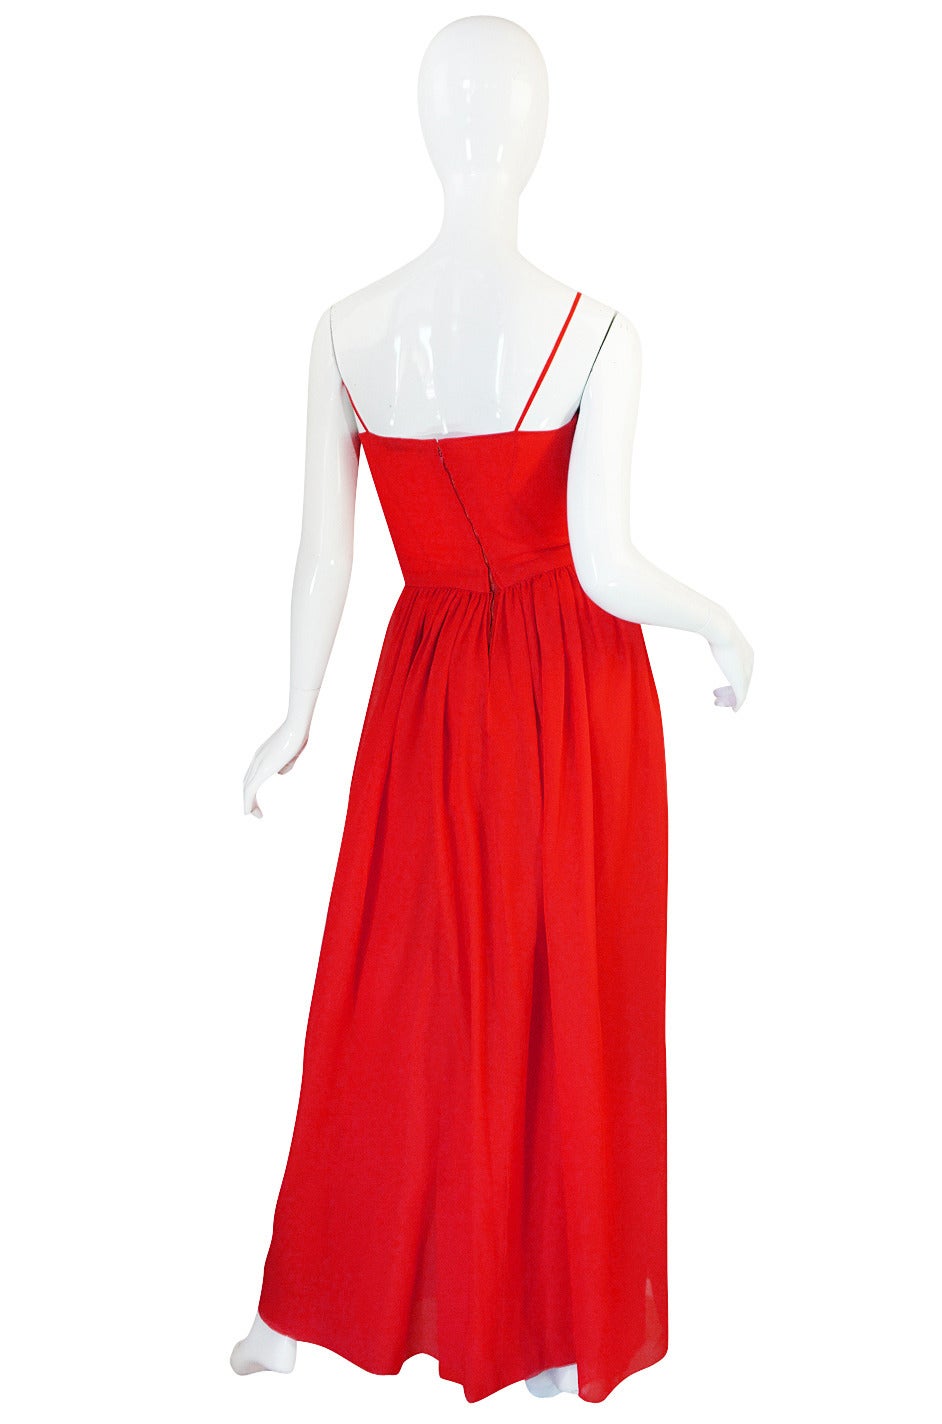 This dress is so simple yet so sublime and I just love it. It is really an amazing example of great lines, great cut and a great fabric choice, all combined with the perfect flattering red. The bodice is simple and fitted with tiny silk straps